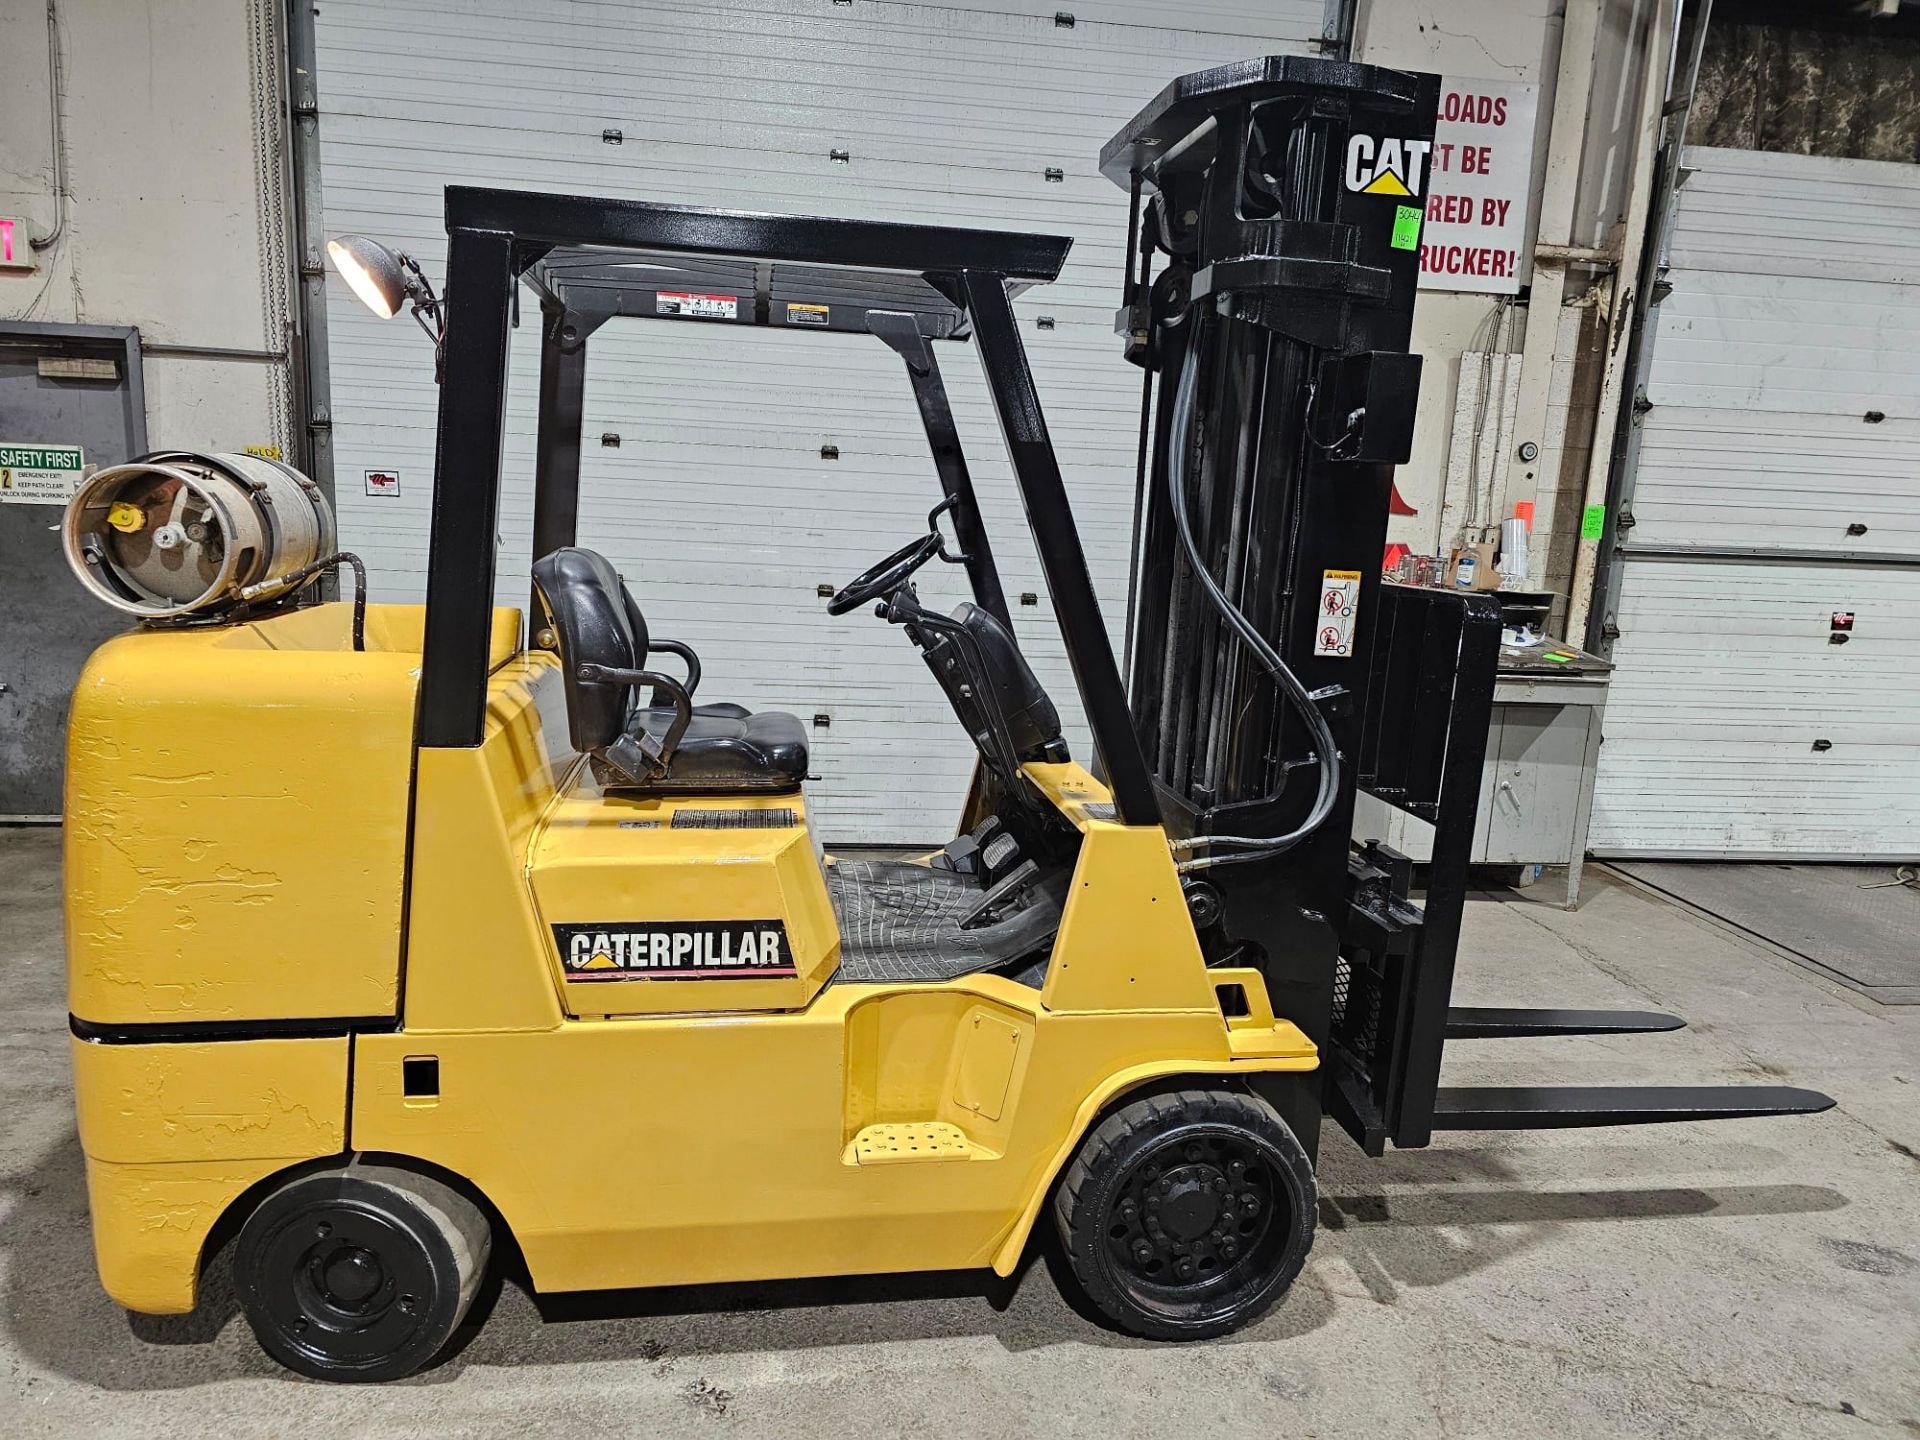 CAT 9,000lbs Capacity LPG (Propane) Forklift with sideshift & 3-STAGE MAST 209" load height (no tank